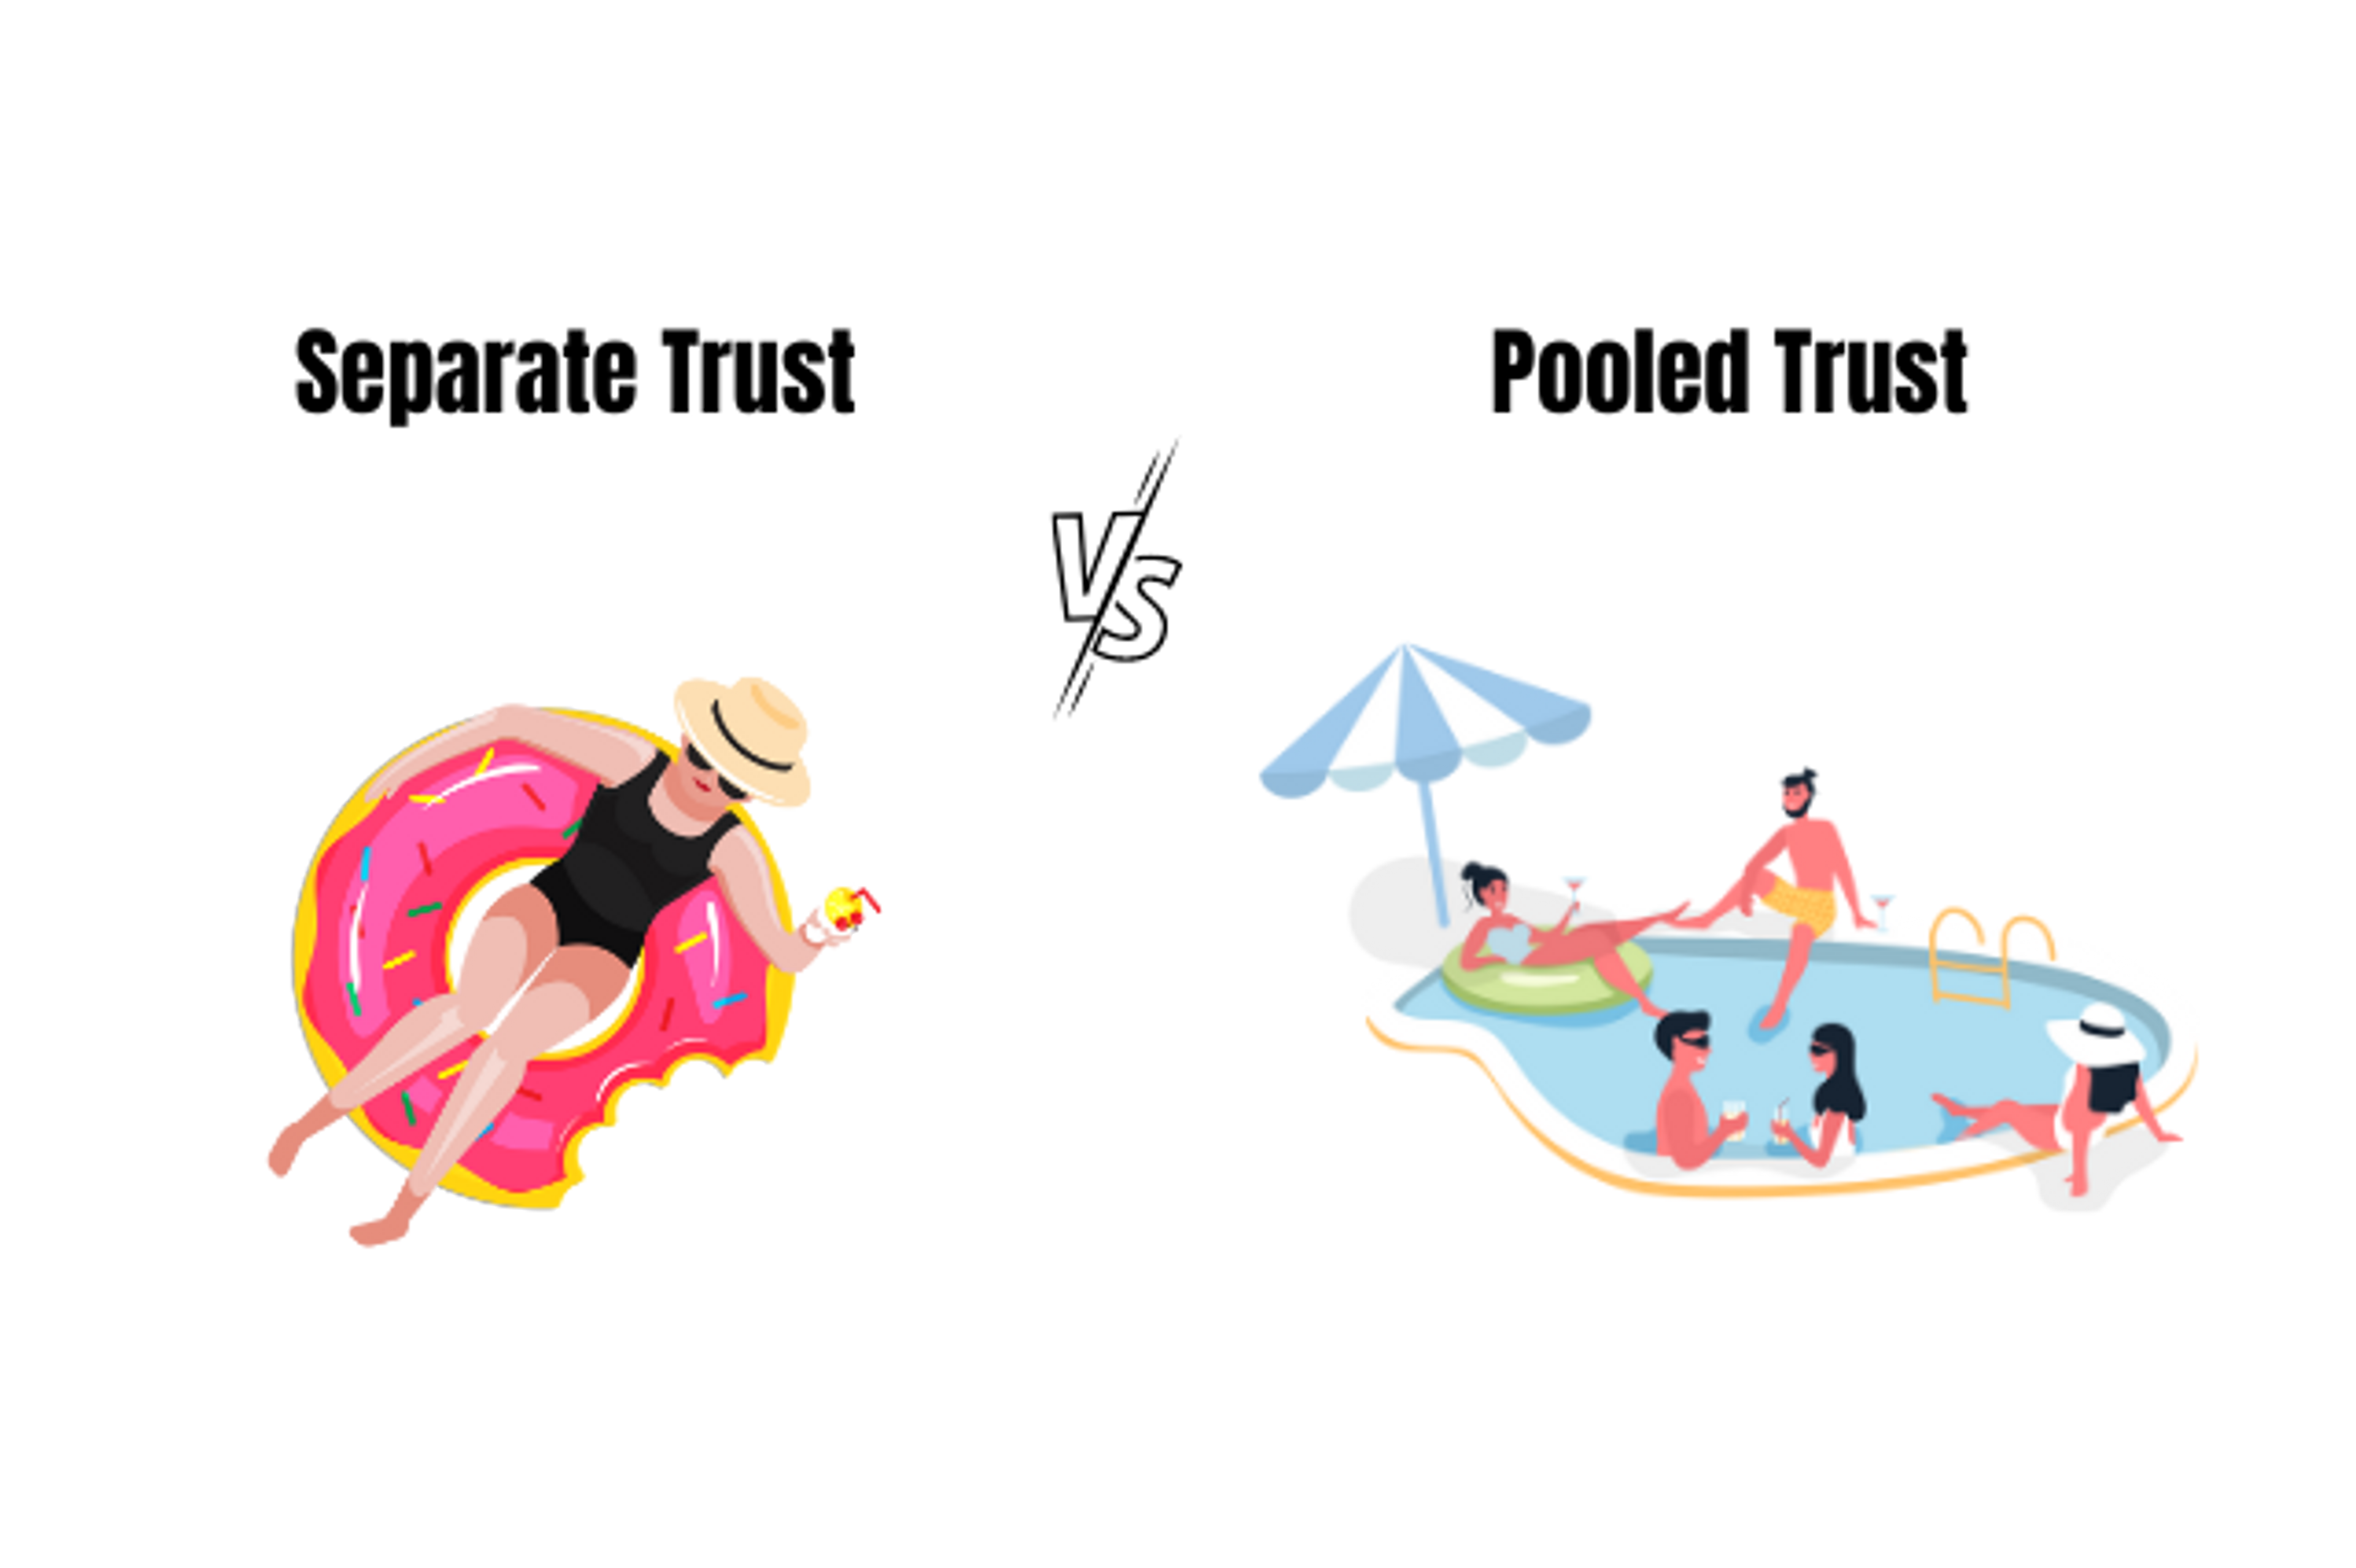 graphic split between individual floating alone on left hand side and a pool party on the right hand side